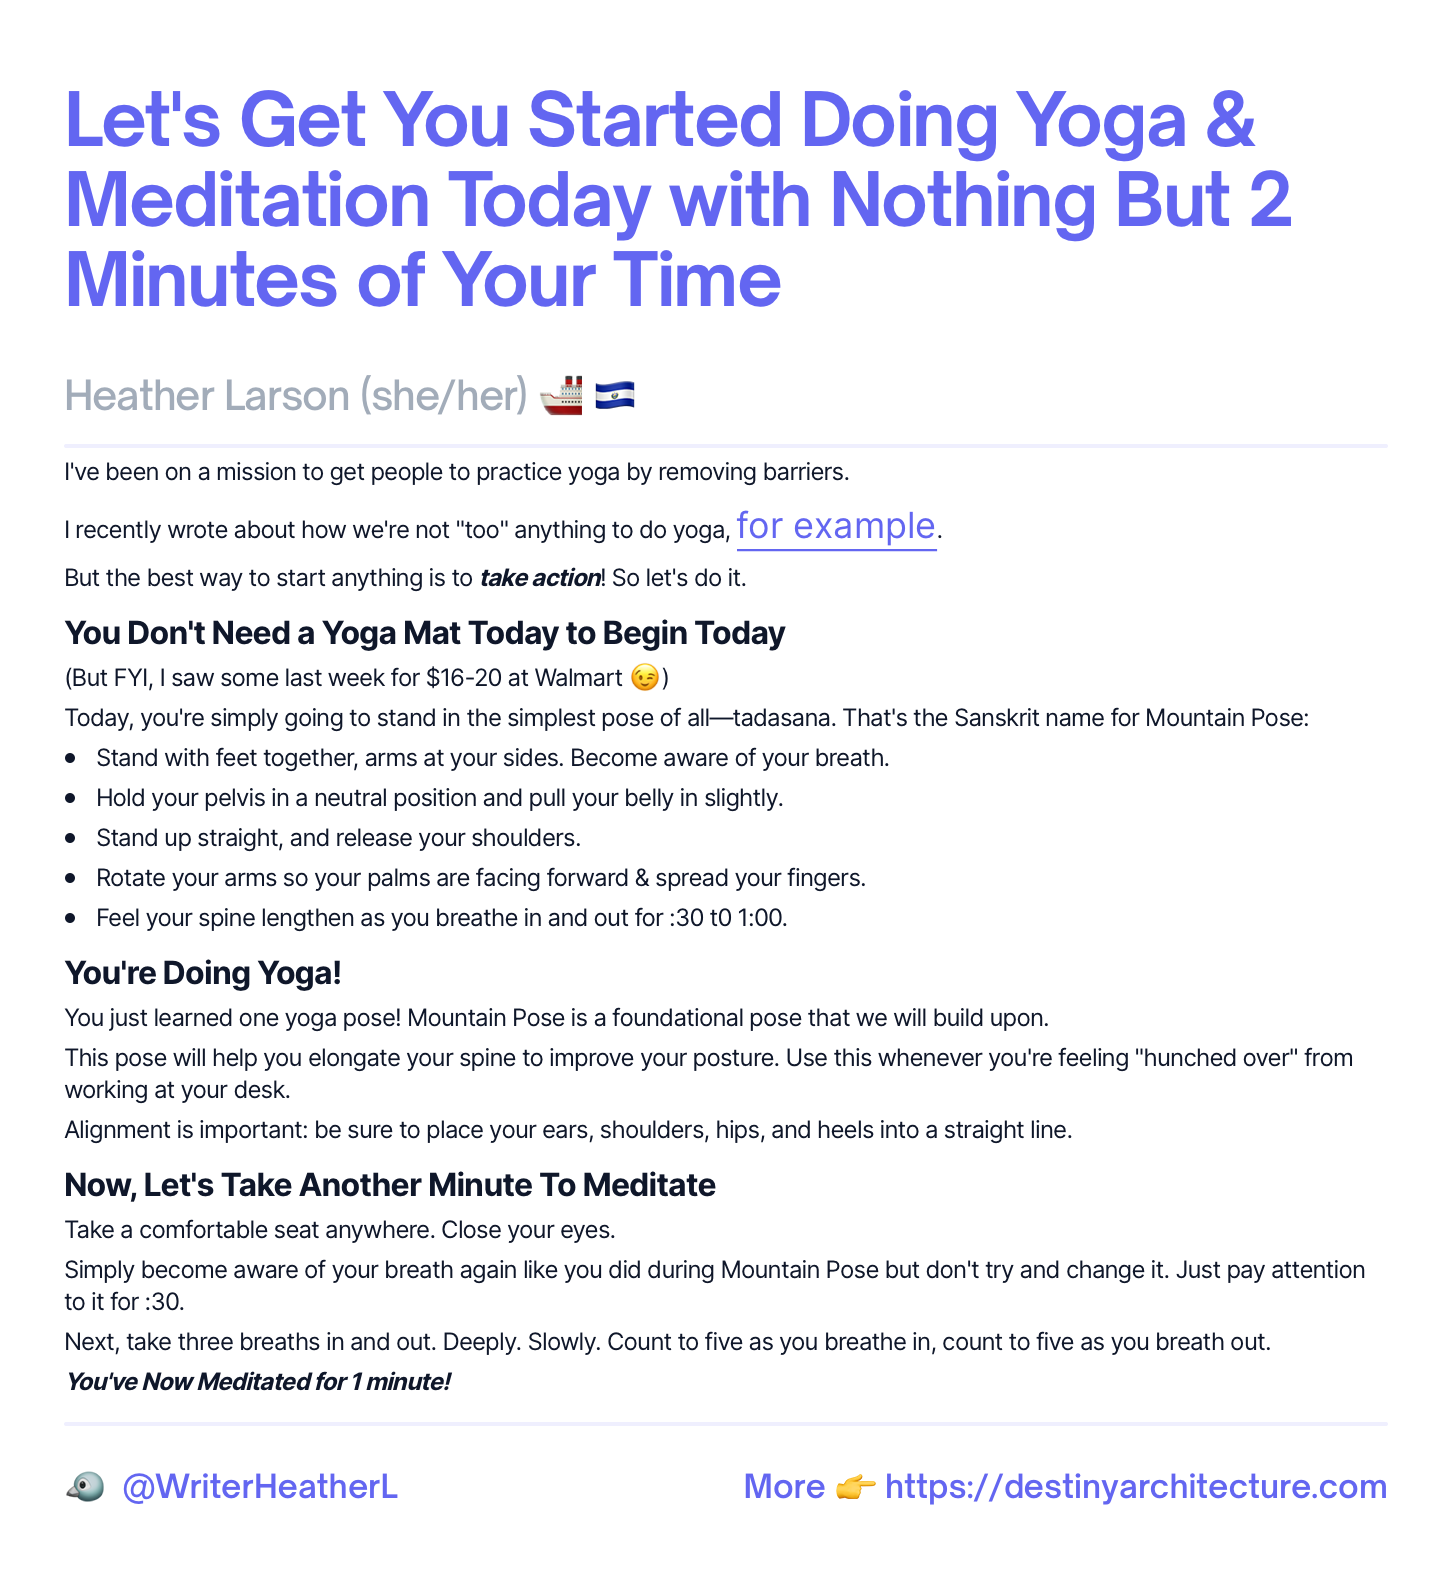 Let's Get You Doing Yoga Right Now!